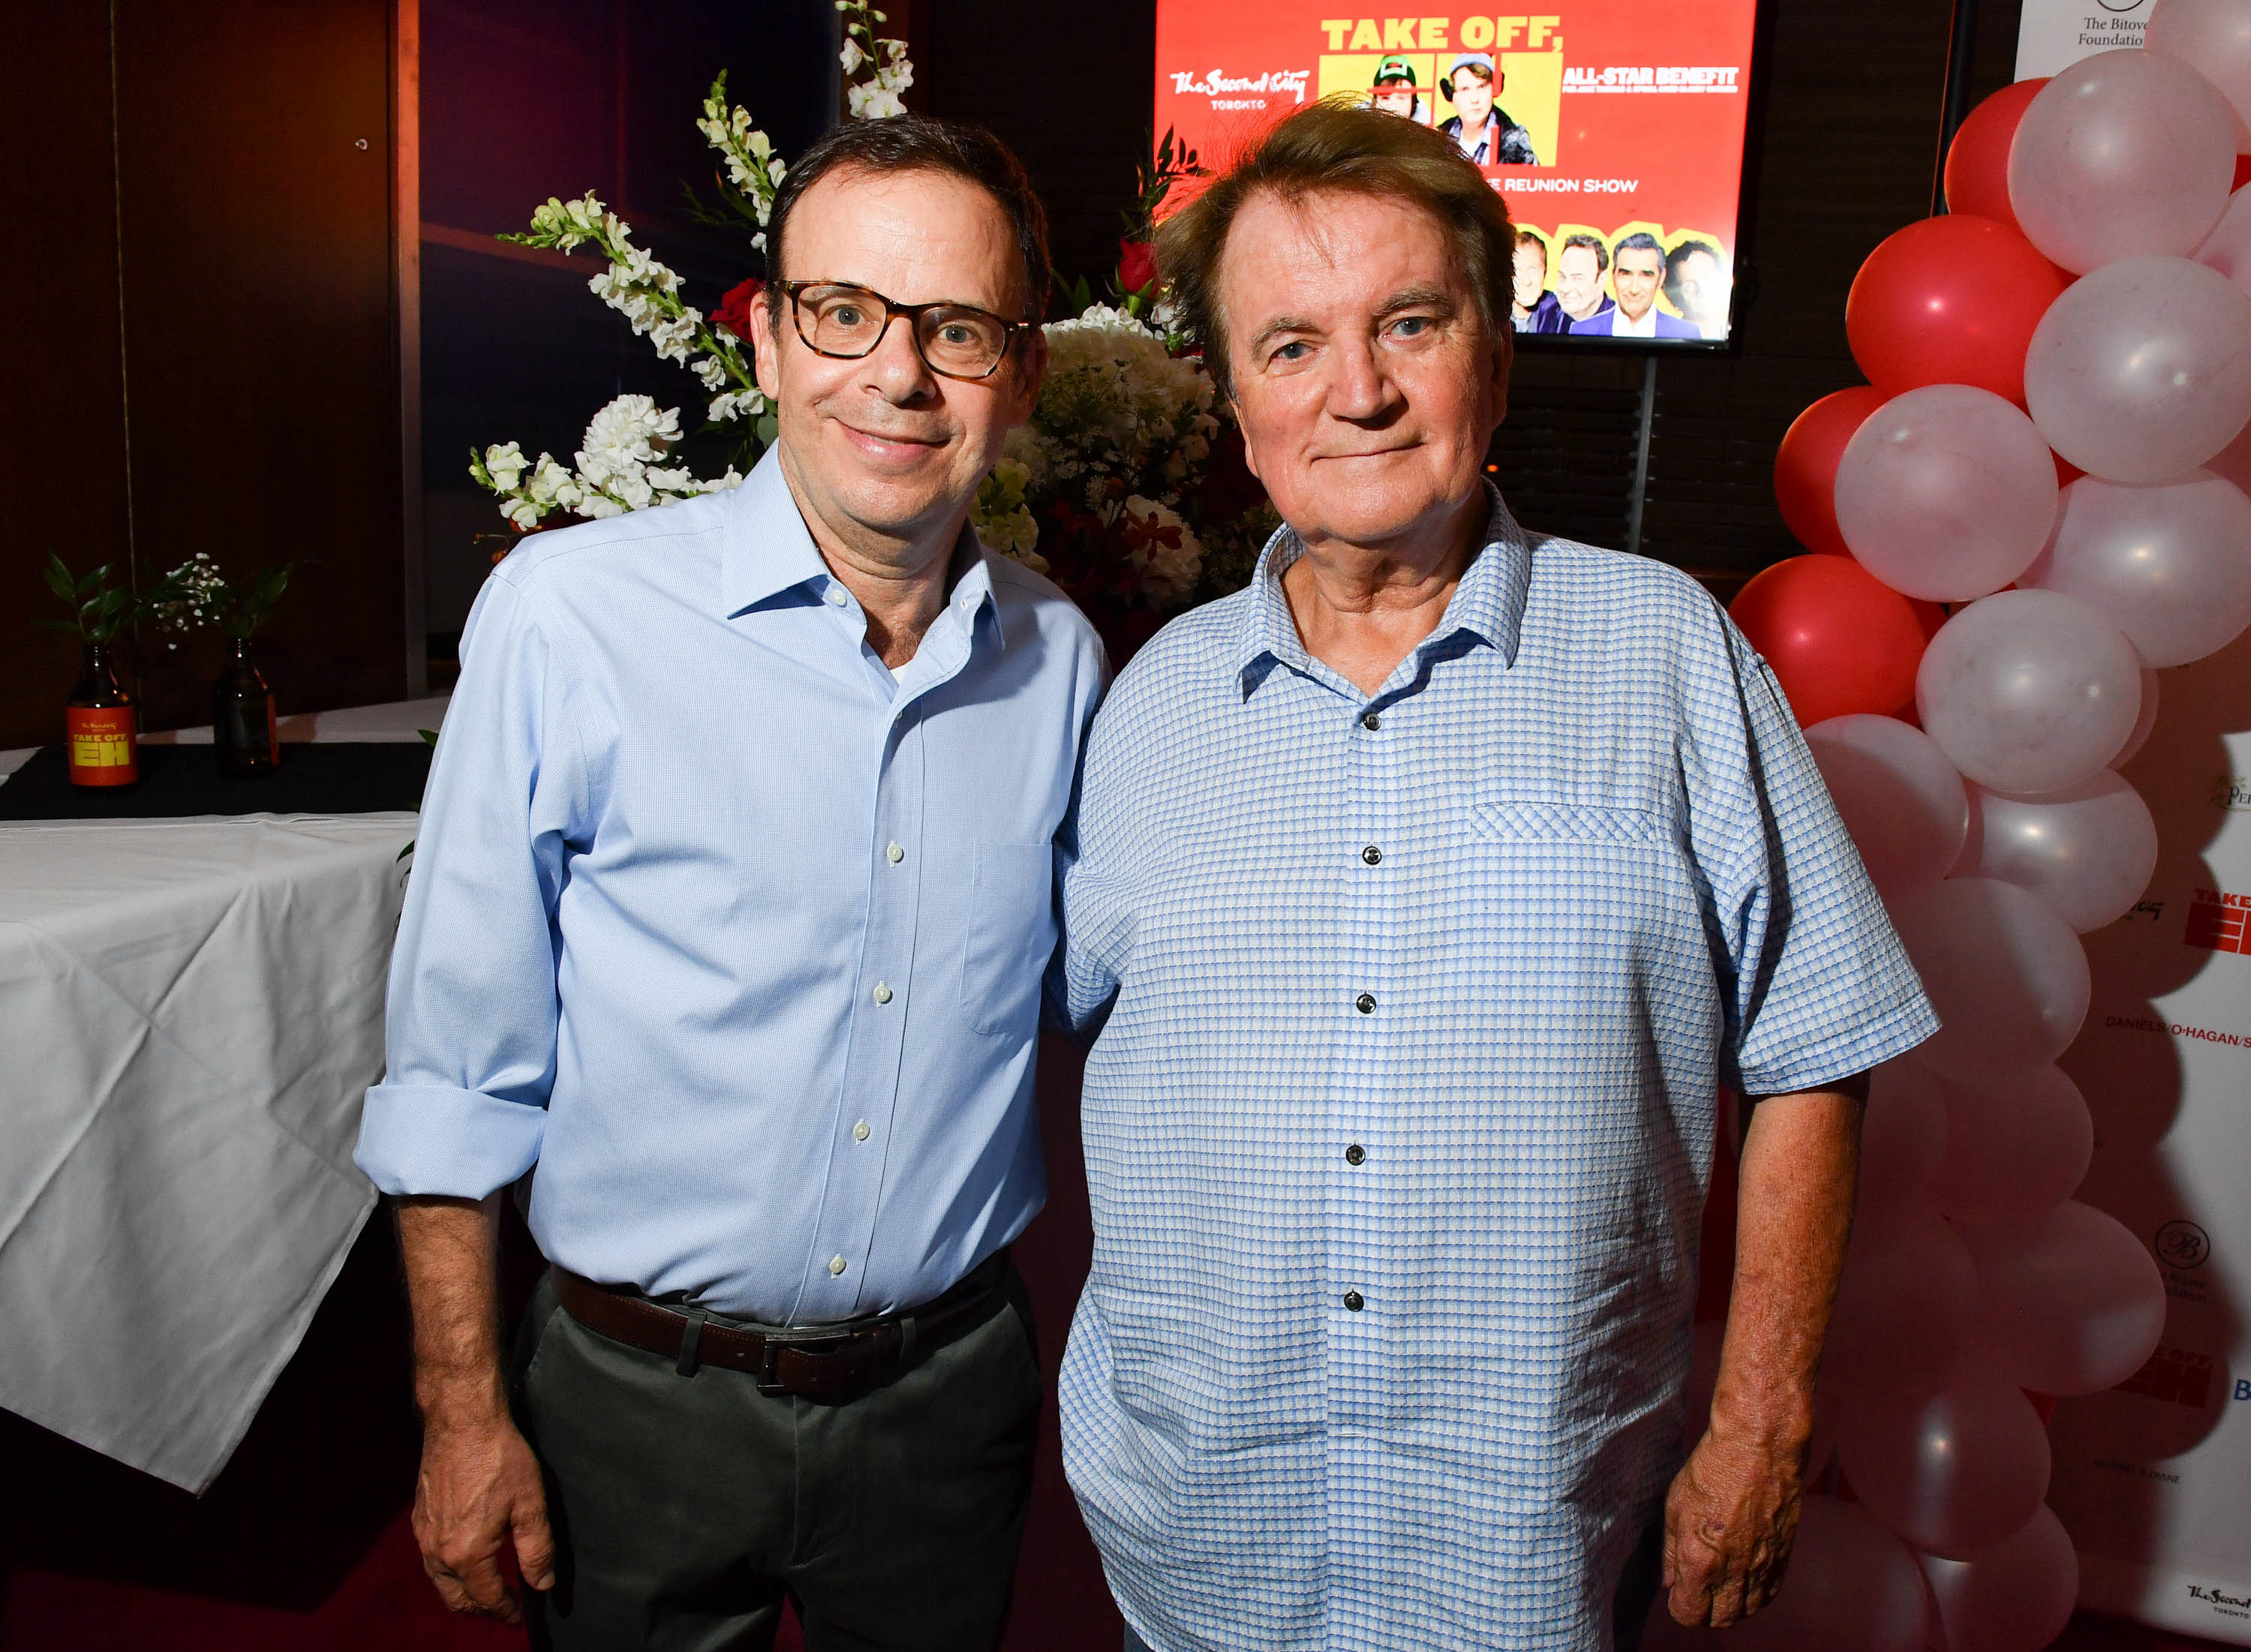 Rick Moranis and Dave Thomas at the "Take Off, EH!" All-Star Benefit after party on July 18, 2017 in Toronto, Canada. | Source: Getty Images